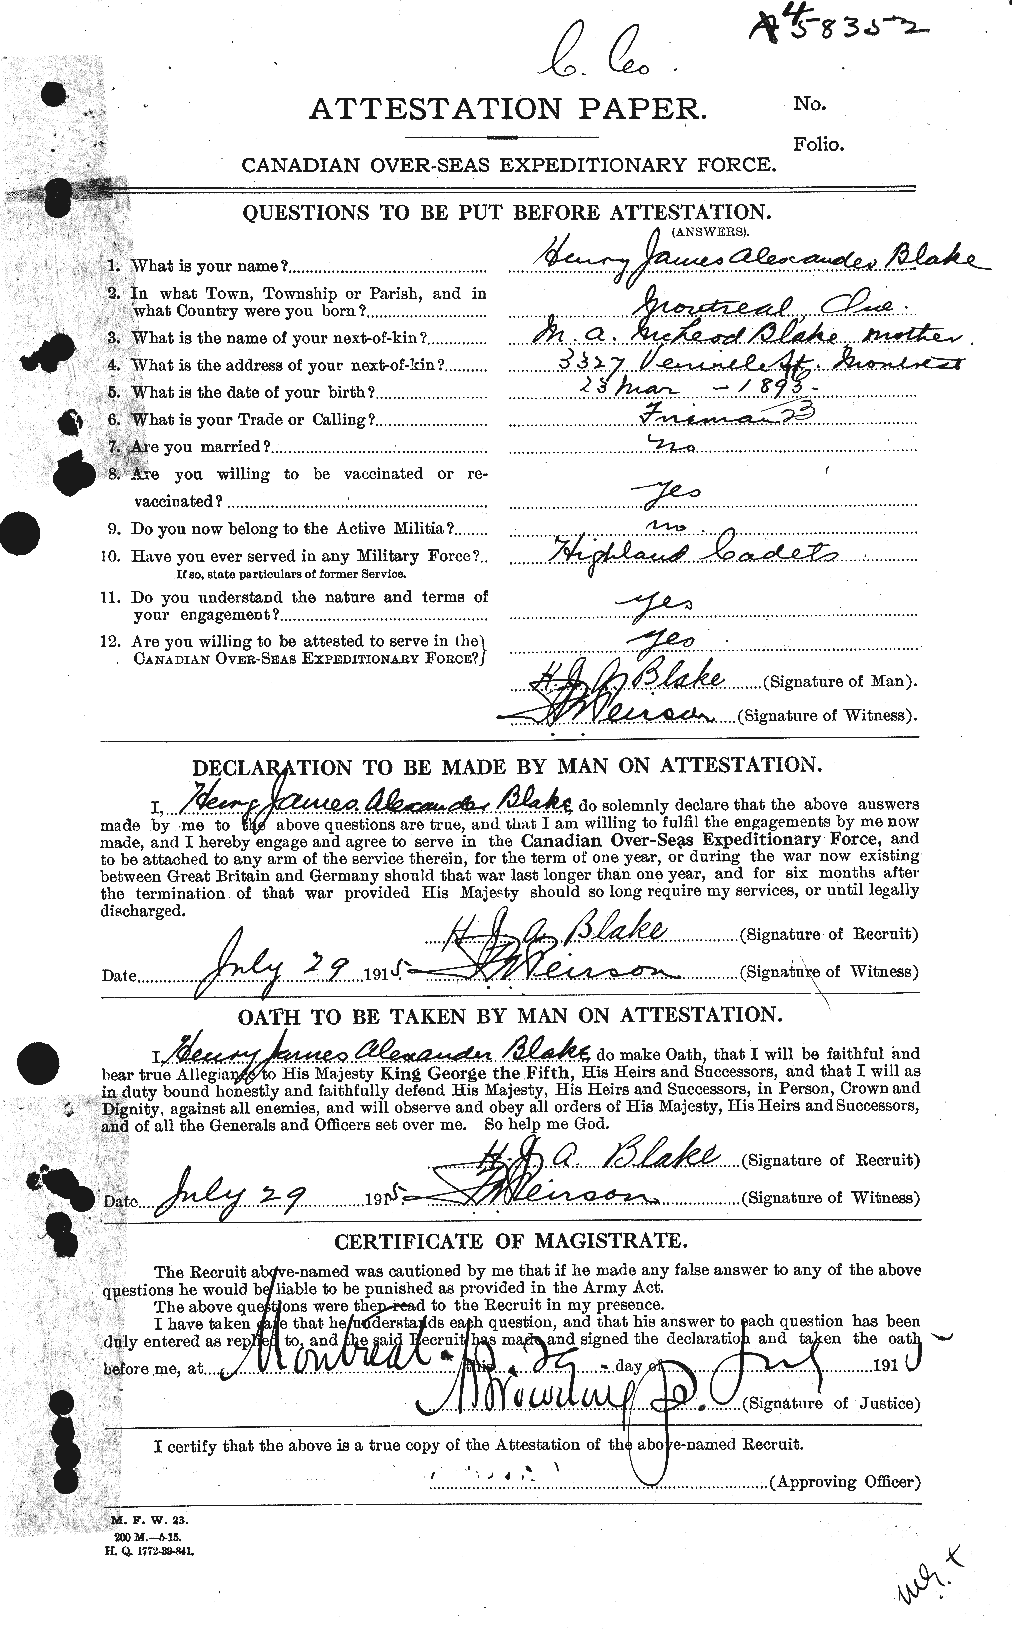 Personnel Records of the First World War - CEF 245888a